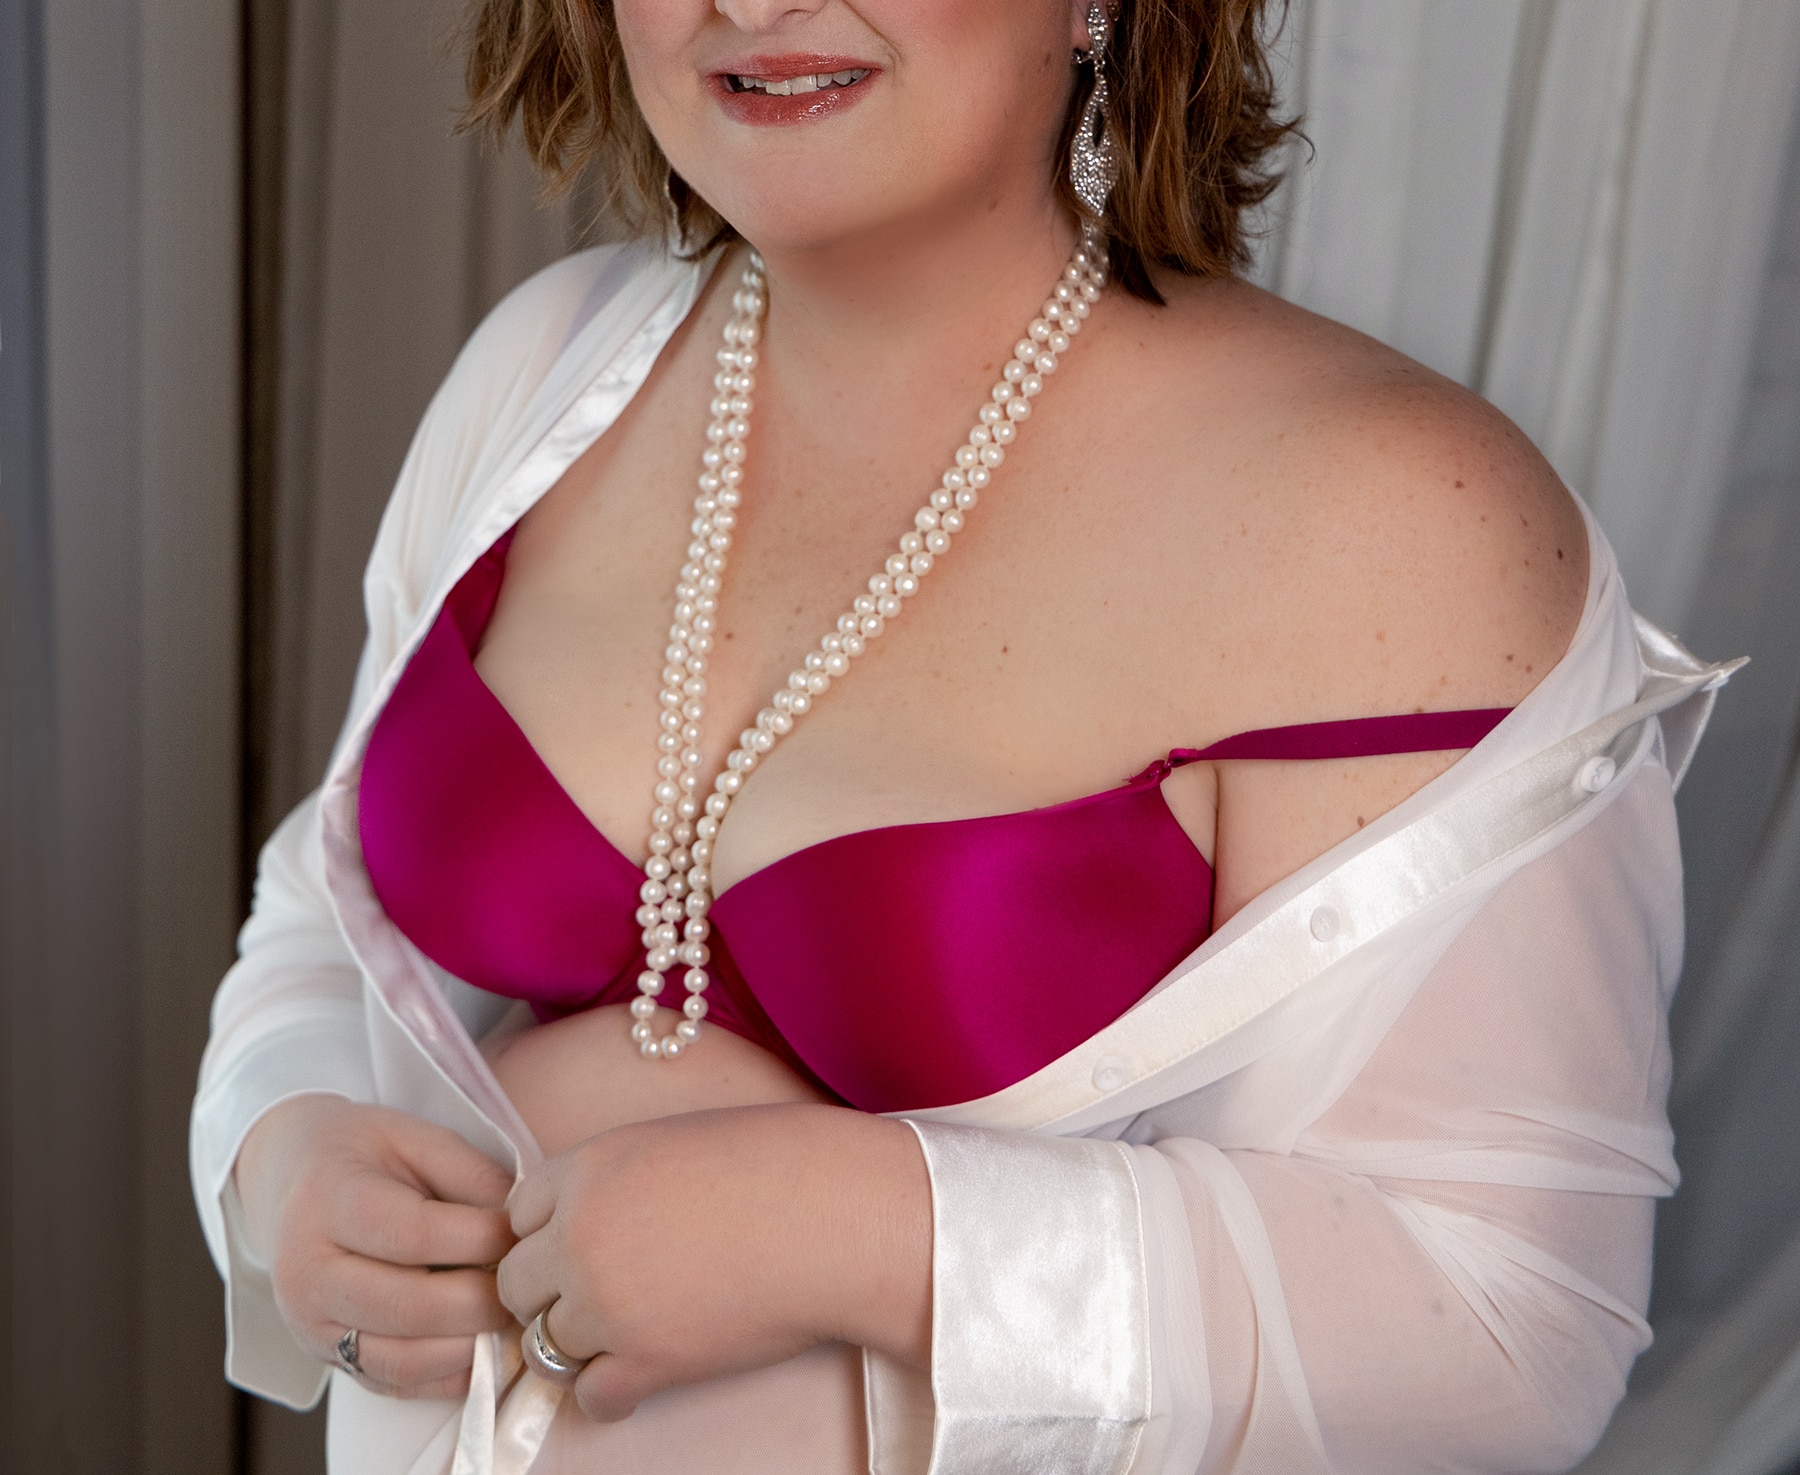 Plus size woman wears a strand of pearls with her bra and panty set for her Lancaster photo shoot with boudoir photographer Shannon Hemauer.